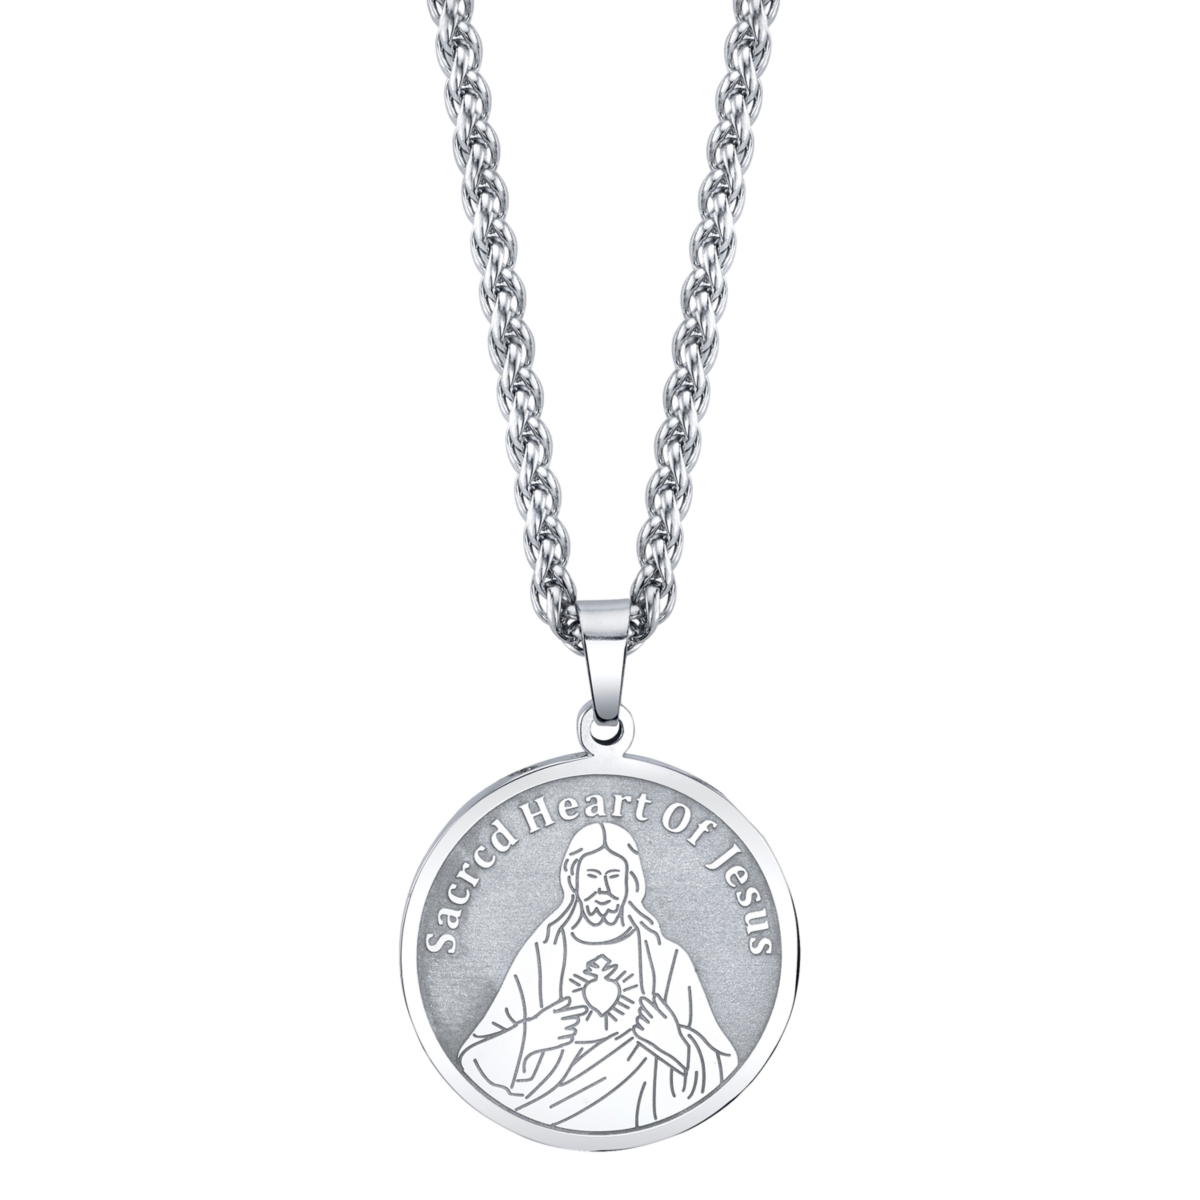 He Rocks "With Jesus in My Heart" Coin Pendant Necklace in Stainless Steel, 24" Chain